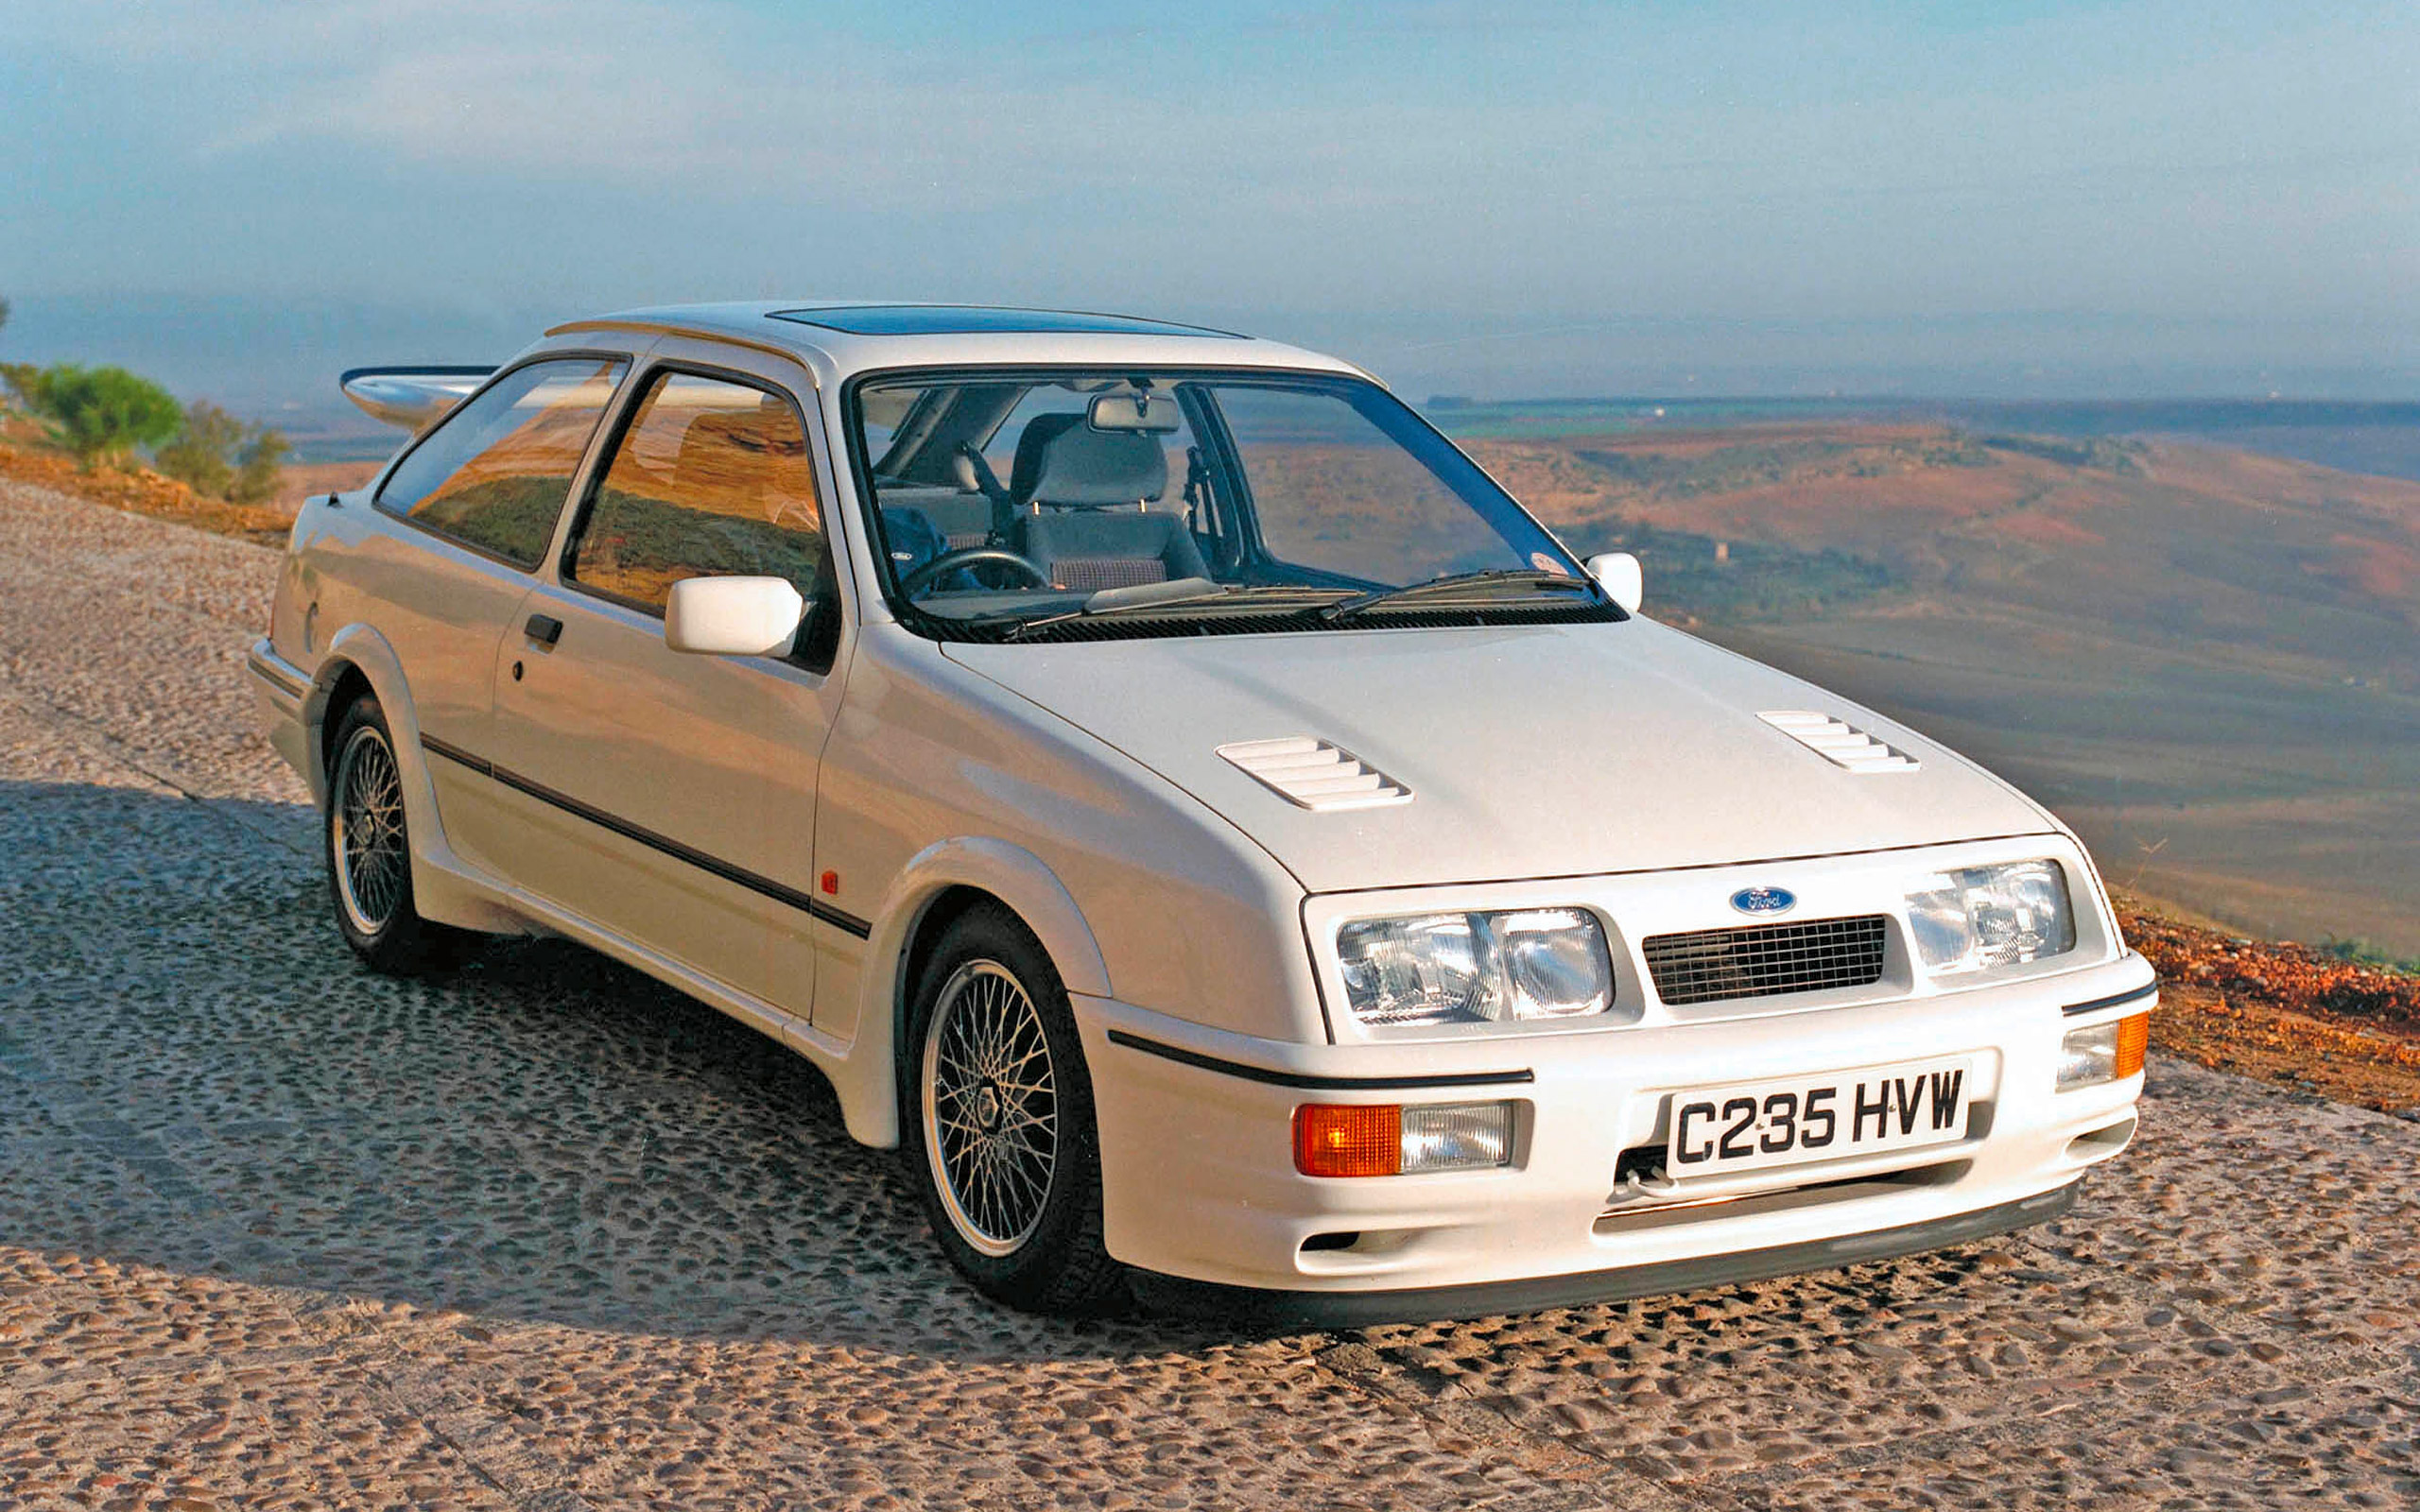  1986 Ford Sierra RS Cosworth Wallpaper.